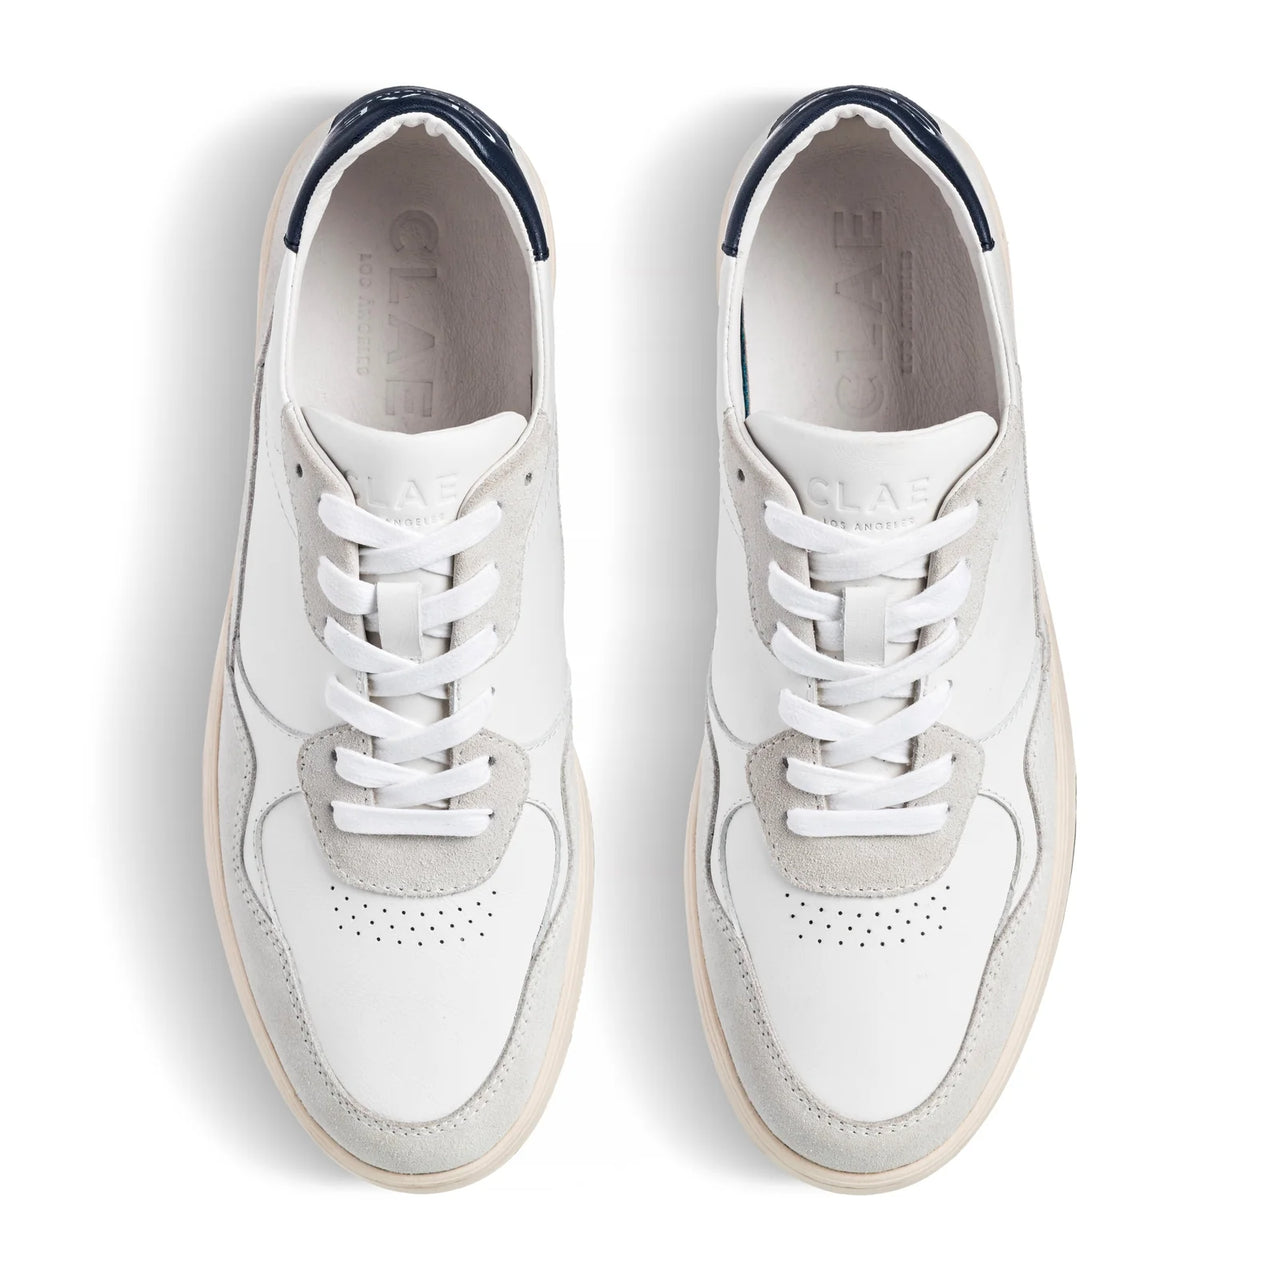 CLAE ELFORD SNEAKERS - WHITE LEATHER NAVY